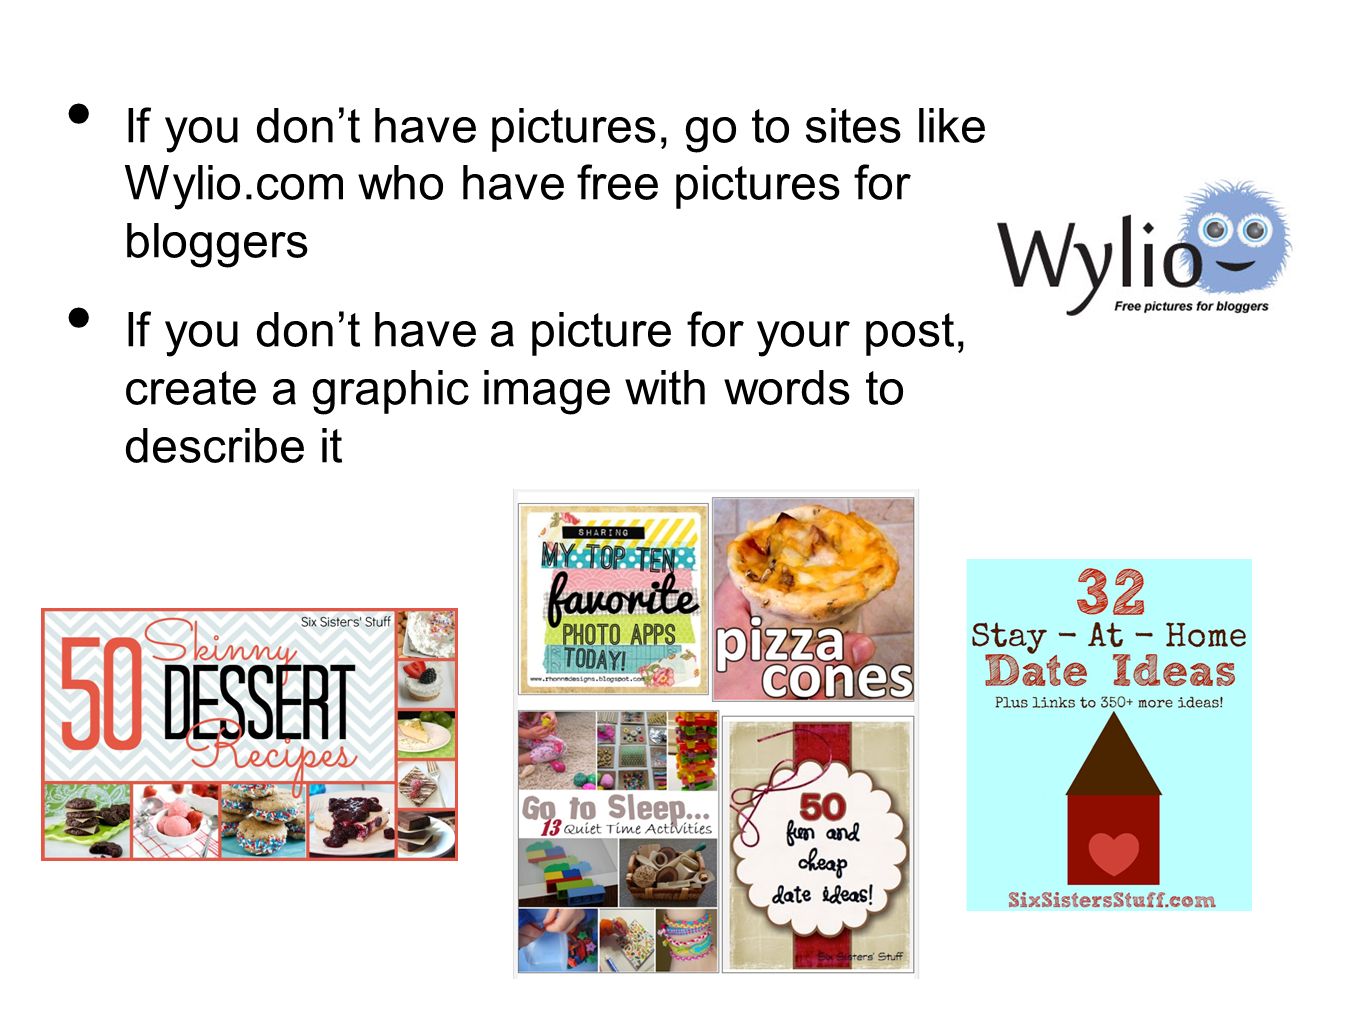 If you don’t have pictures, go to sites like Wylio.com who have free pictures for bloggers If you don’t have a picture for your post, create a graphic image with words to describe it